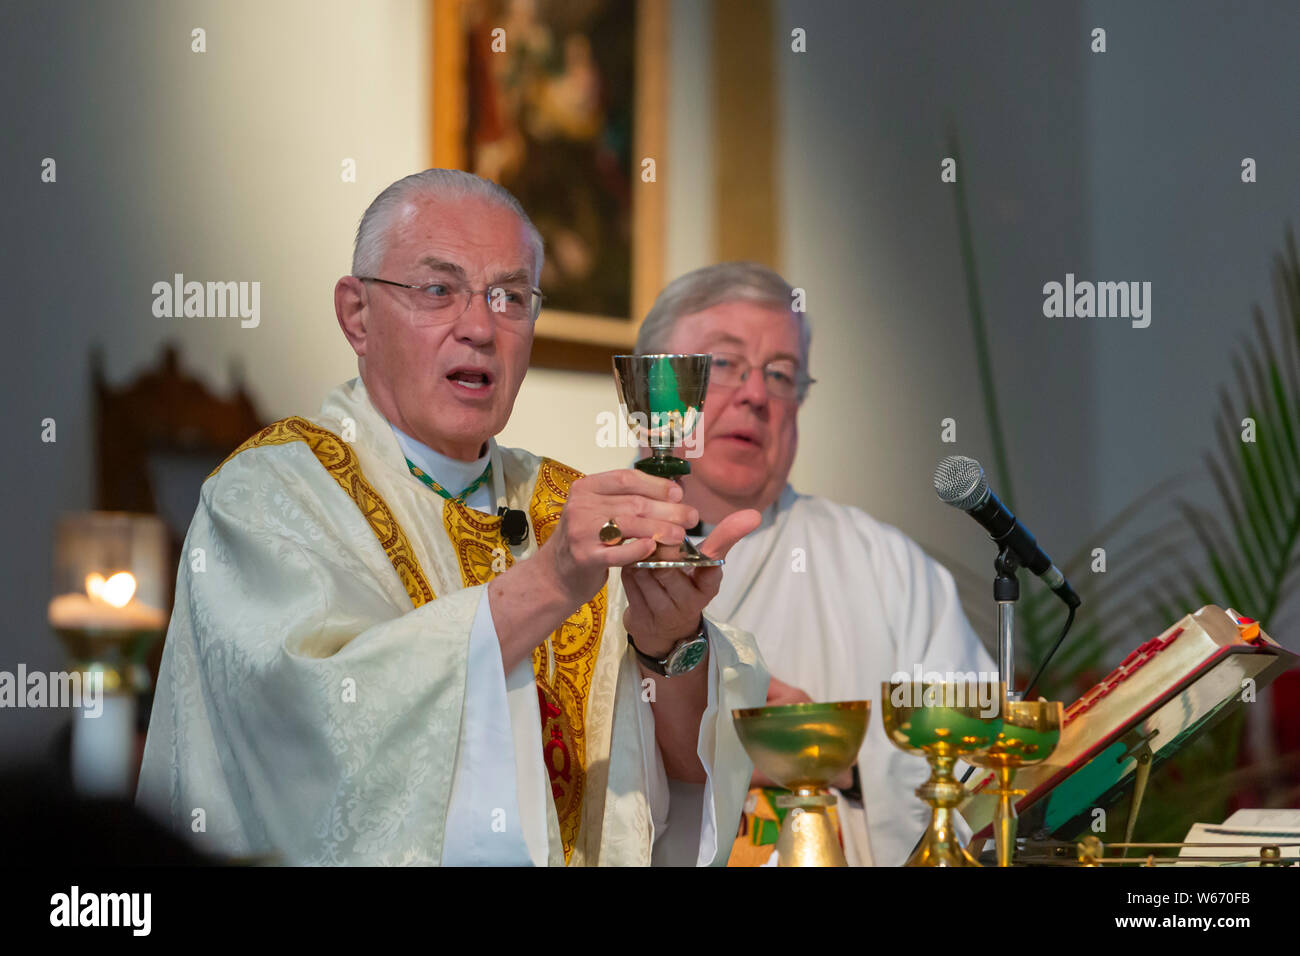 Detroit, Michigan - A Catholic mass for immigrant families that are separated or in detention. Bishop Donald Hanchon (left) and Msgr. Charles Konsanke Stock Photo